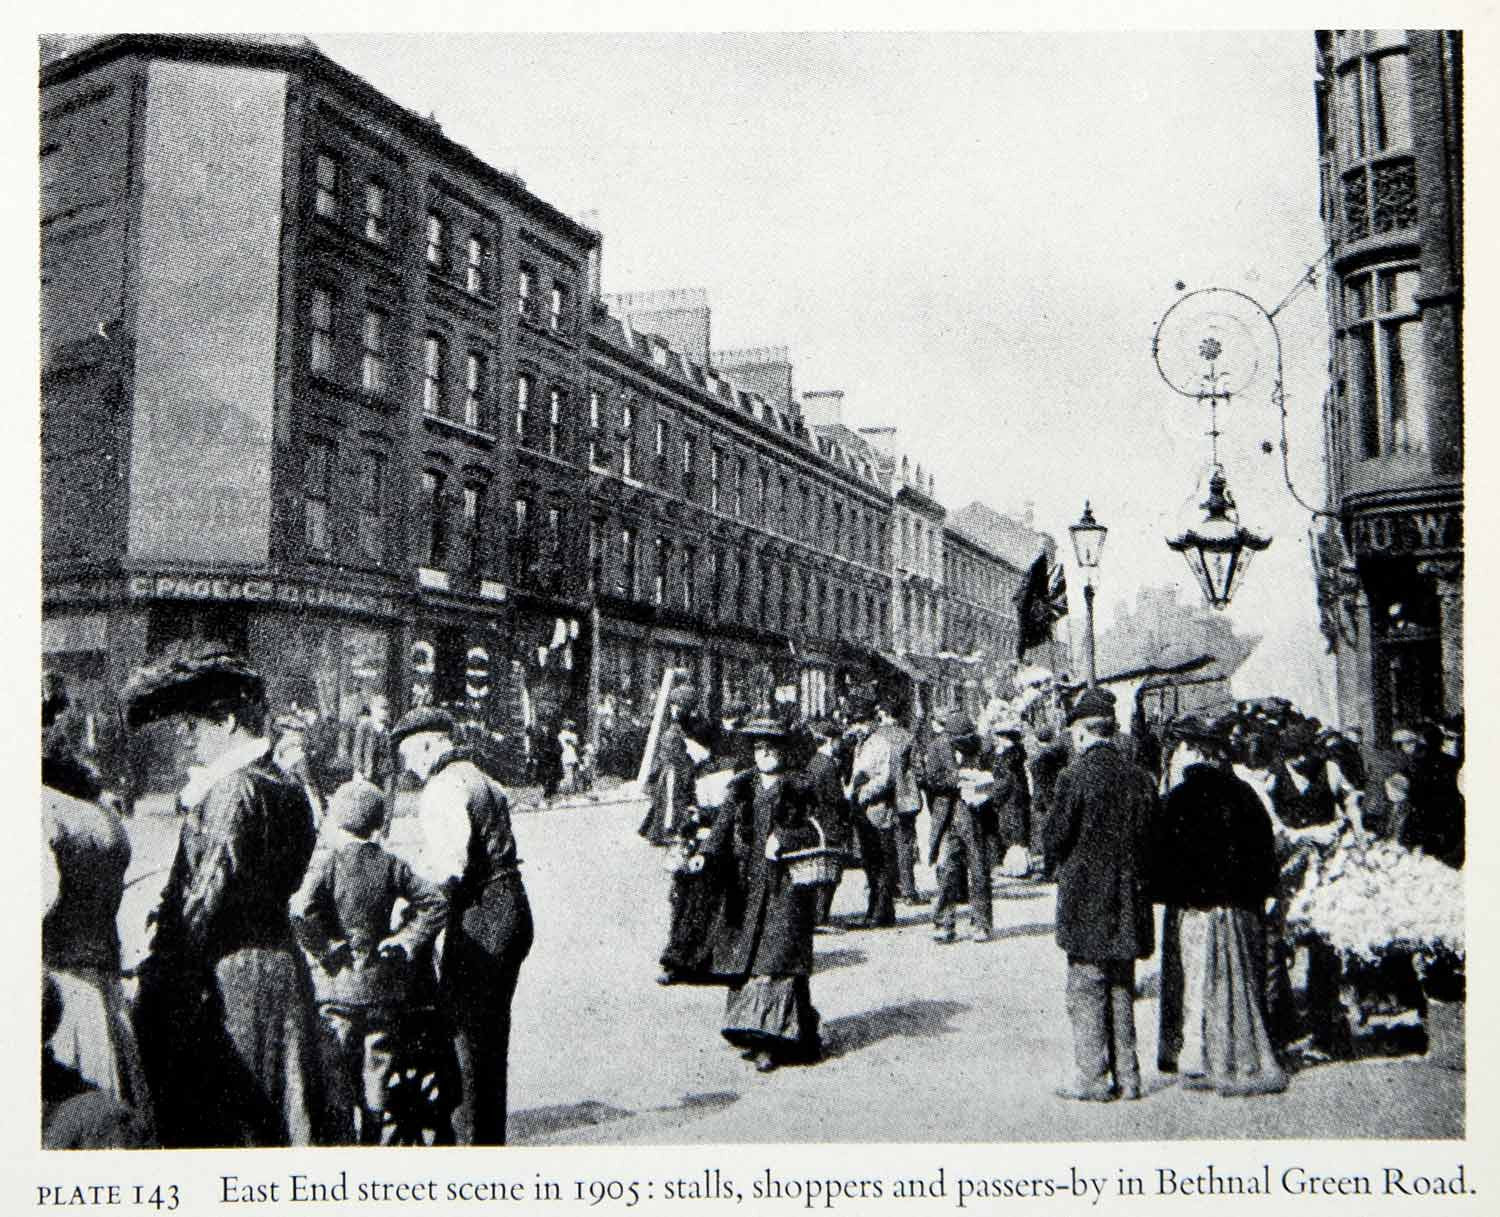 1951 Print East End Bethnal Green Road London England Shoppers Victorian XEGA2 - Period Paper
